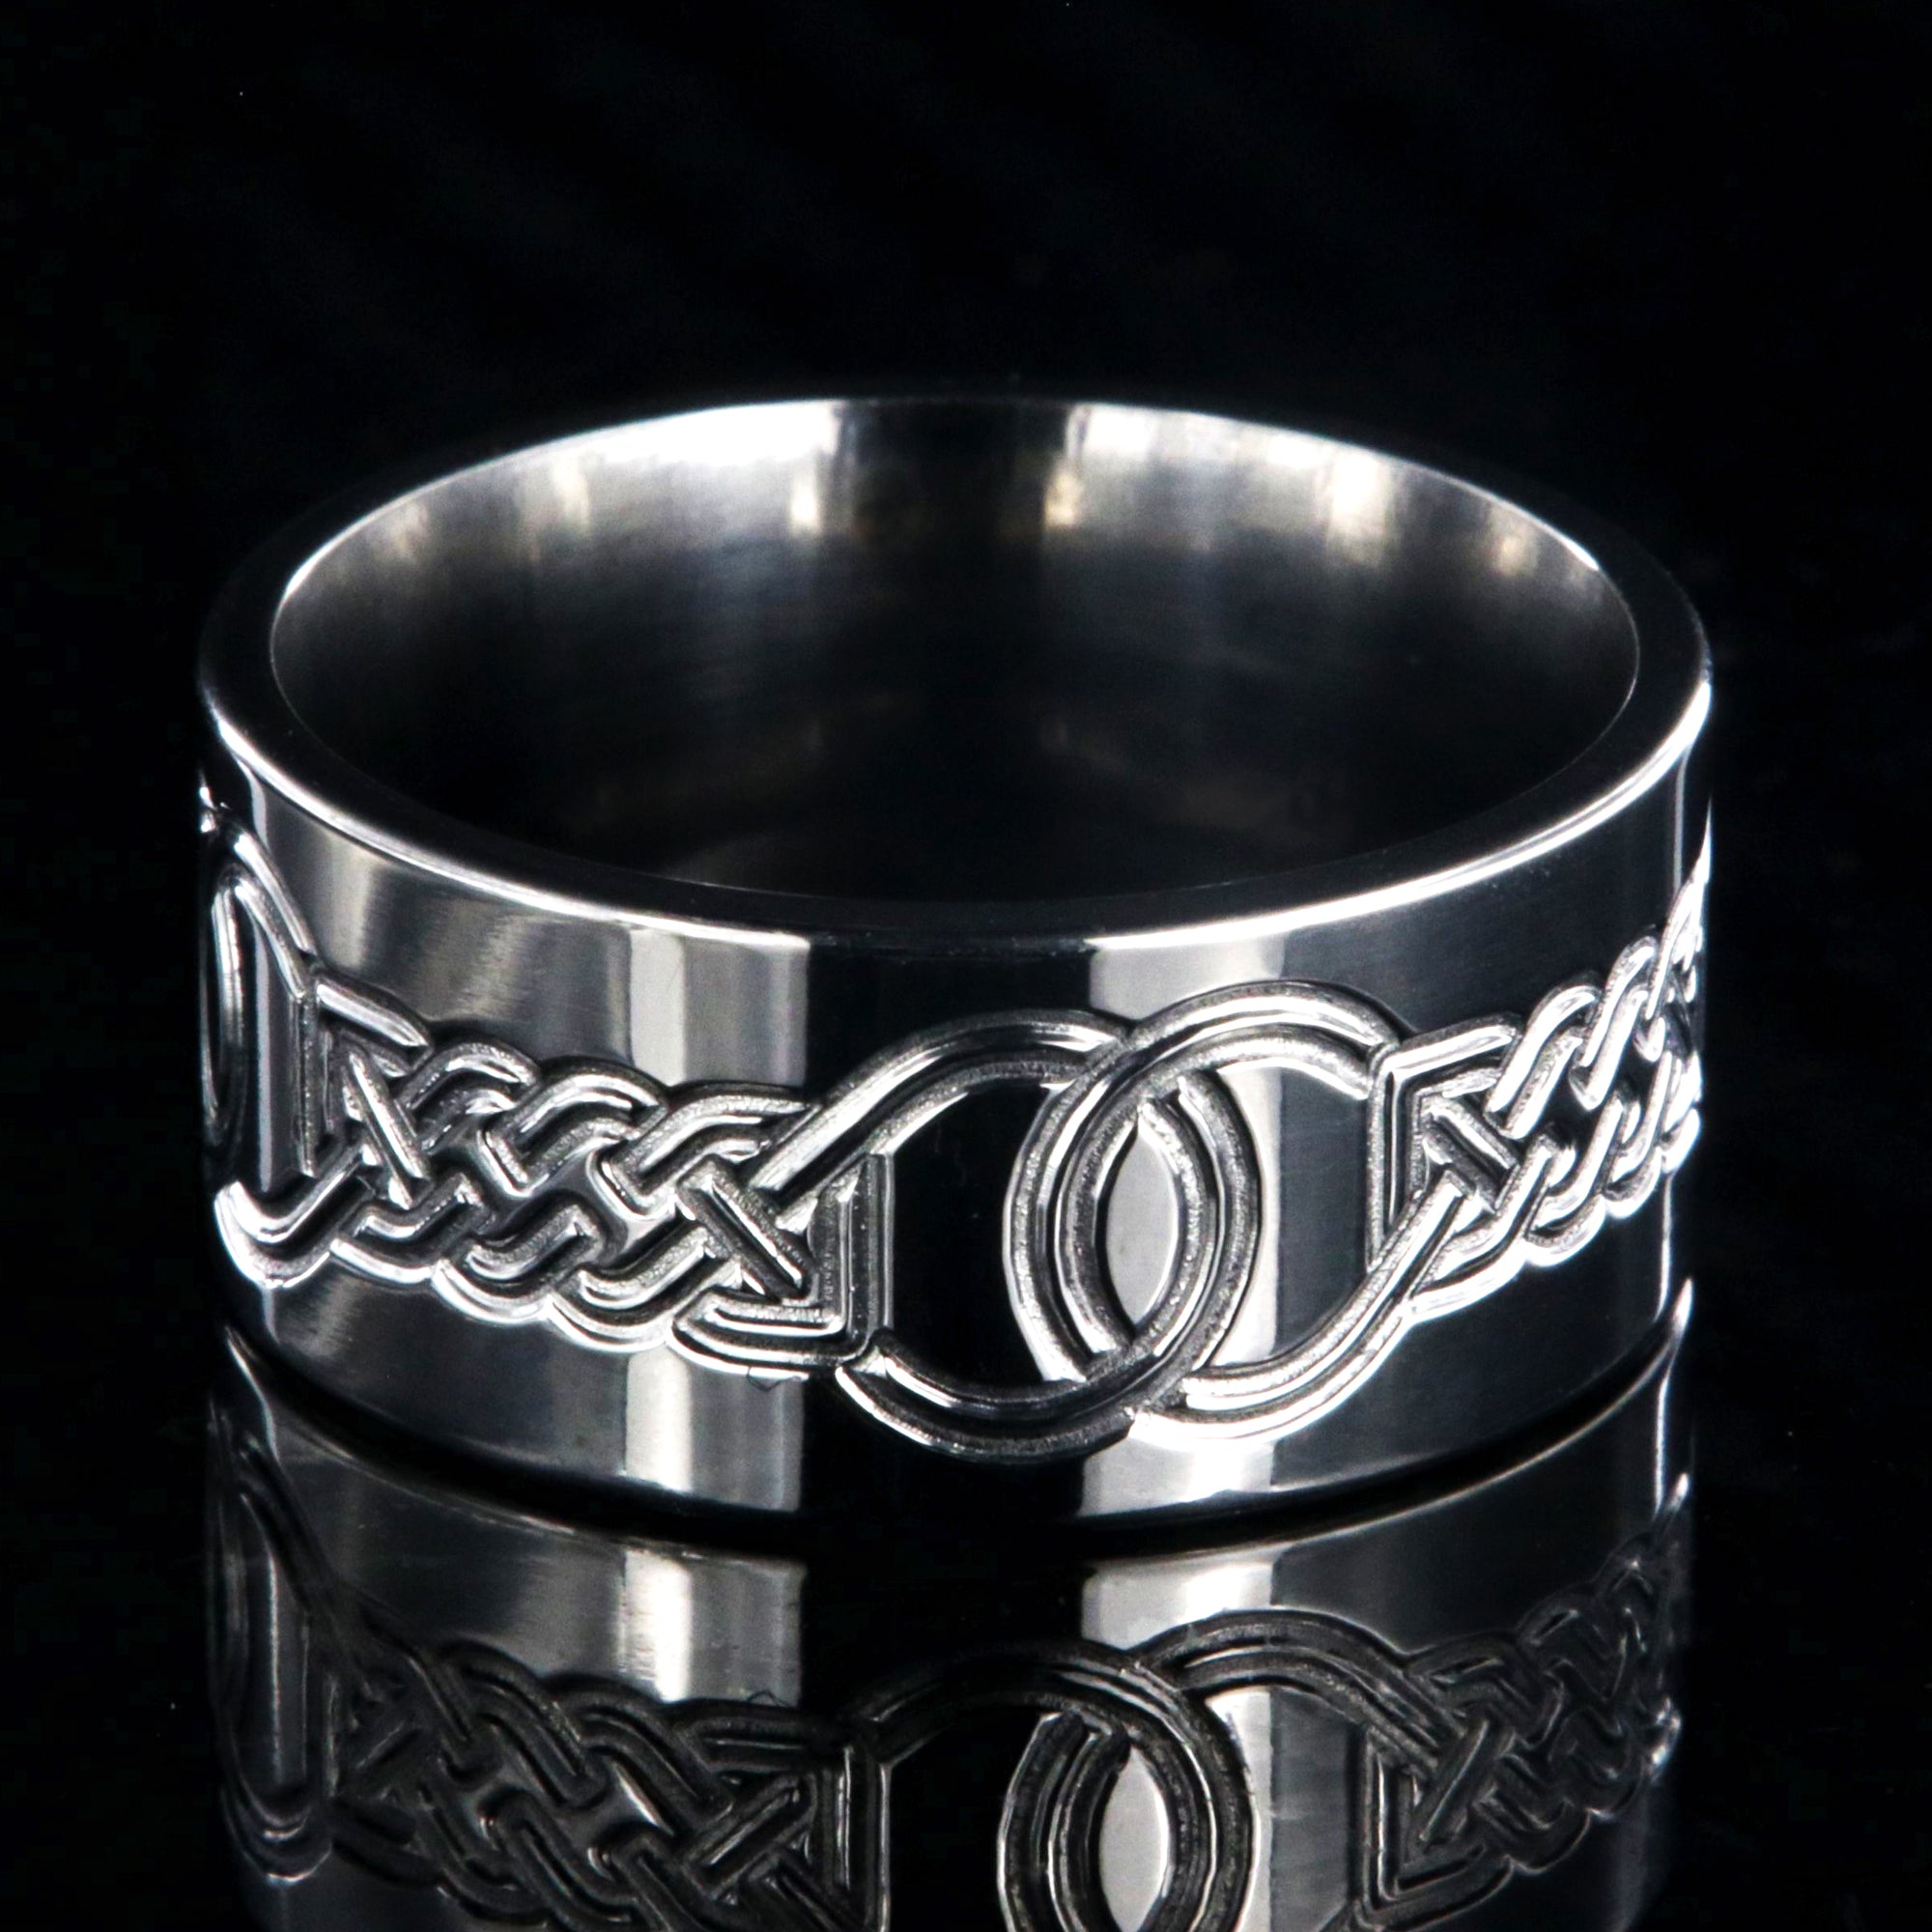 10mm wide titanium ring with a milled sailor's knot